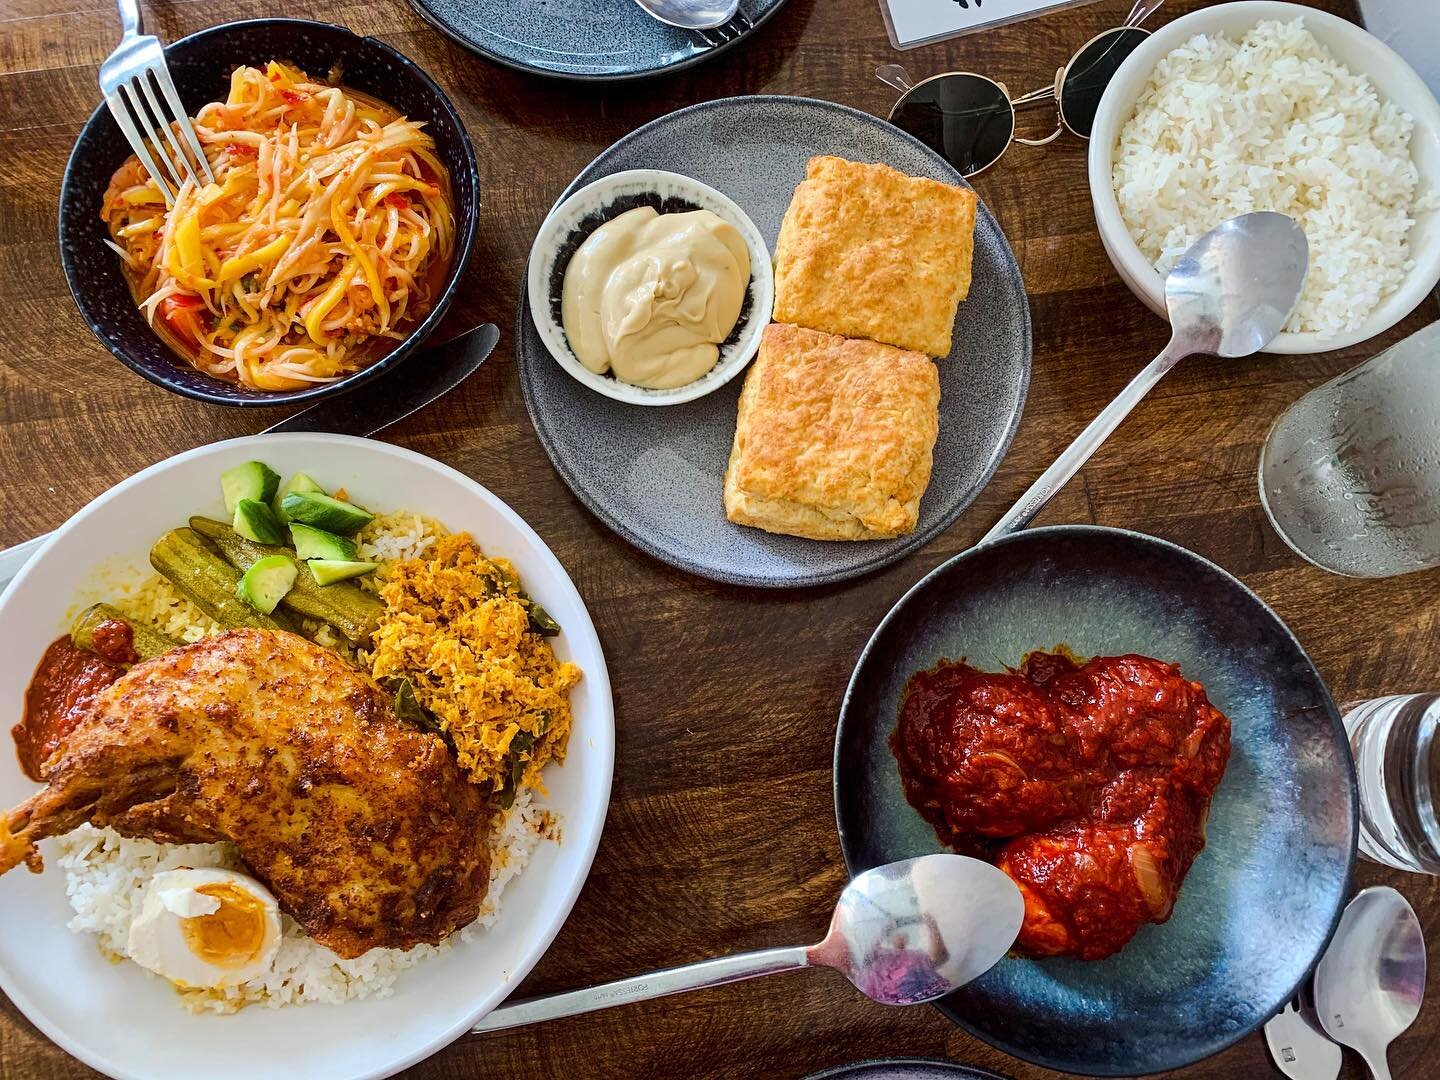 I&rsquo;m a big fan of ethnic brunch and Malaysian restaurants are few and far in between, so @makan_dc has been on my list for a while!

Tucked into a street corner in Columbia Heights, Makan&rsquo;s modern Malaysian cuisine is a treat for the sense